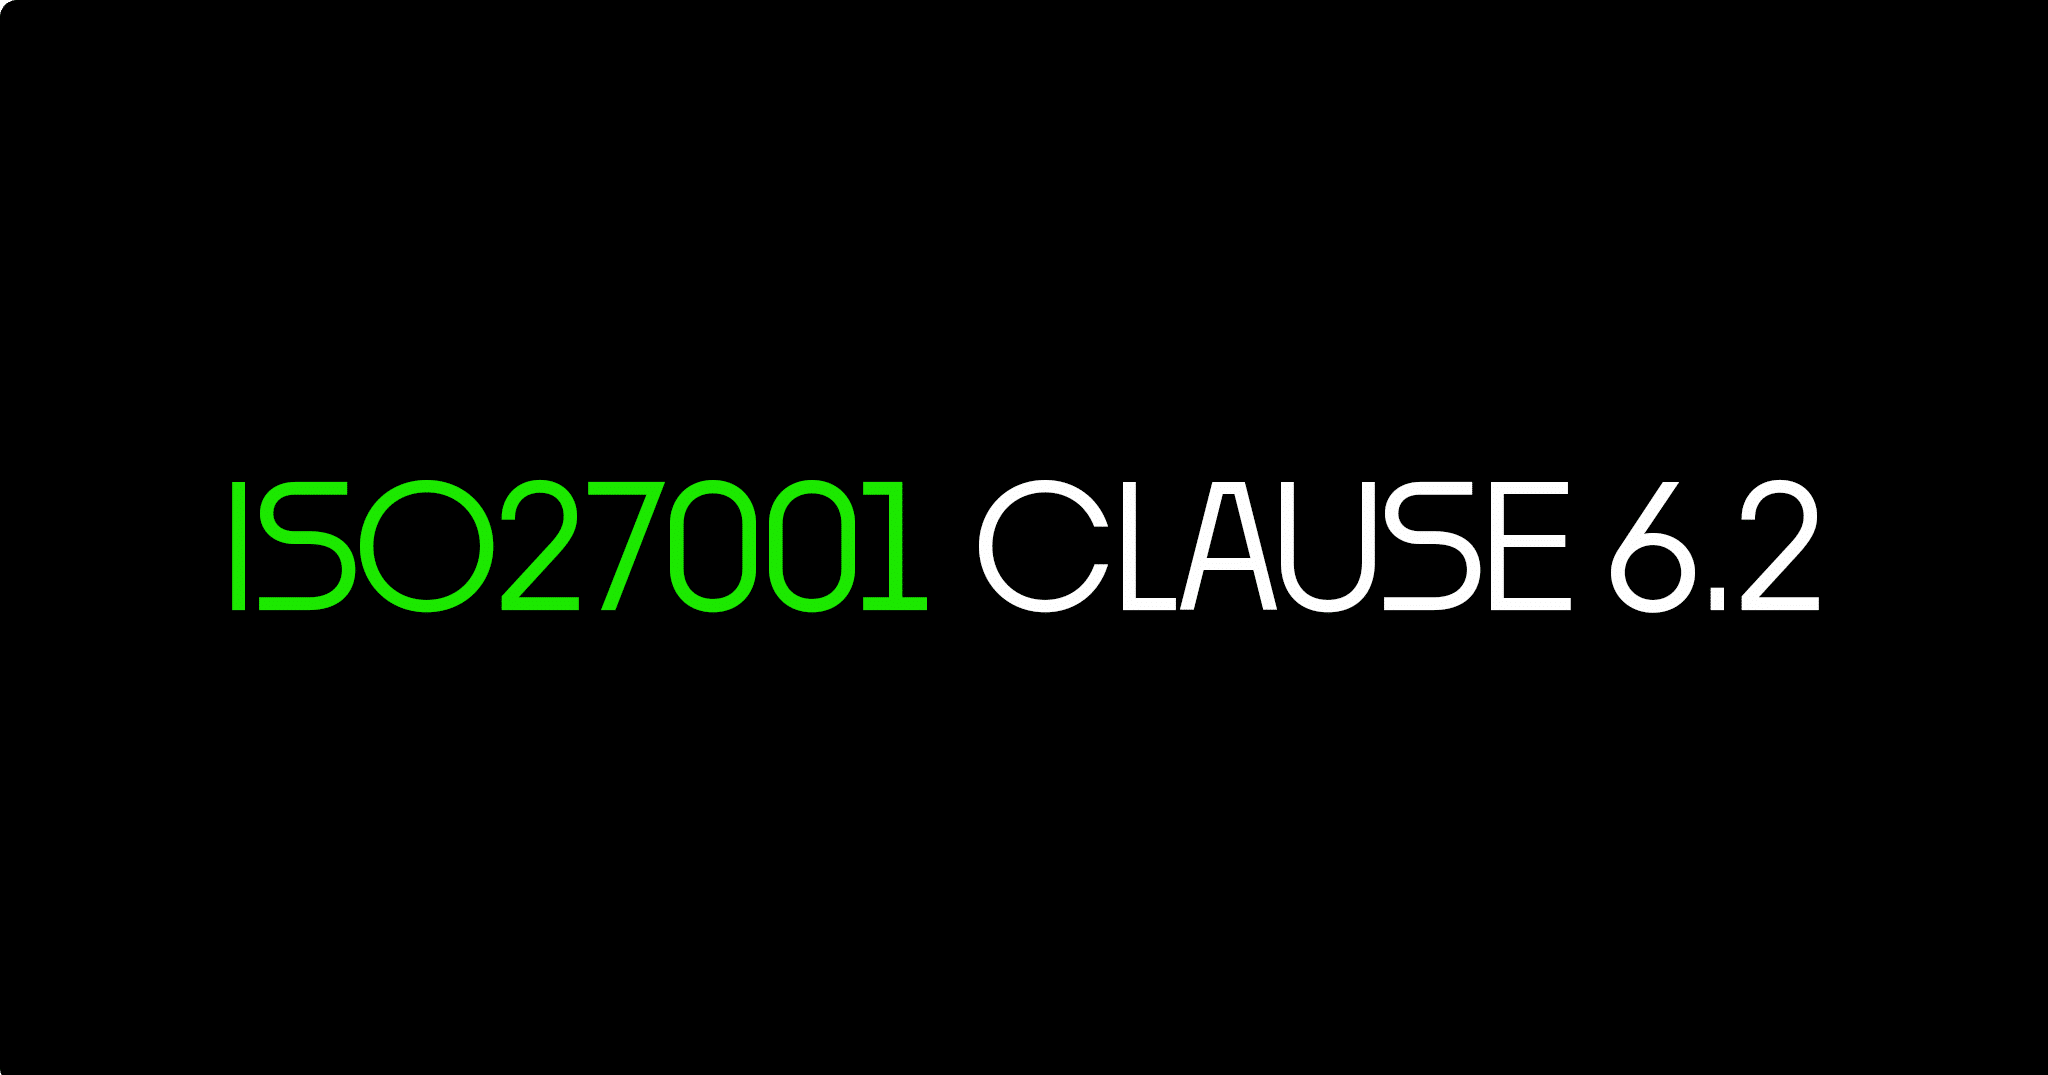 ISO 27001 Clause 6.2 Information Security Objectives and Planning to Achieve Them – Ultimate Certification Guide